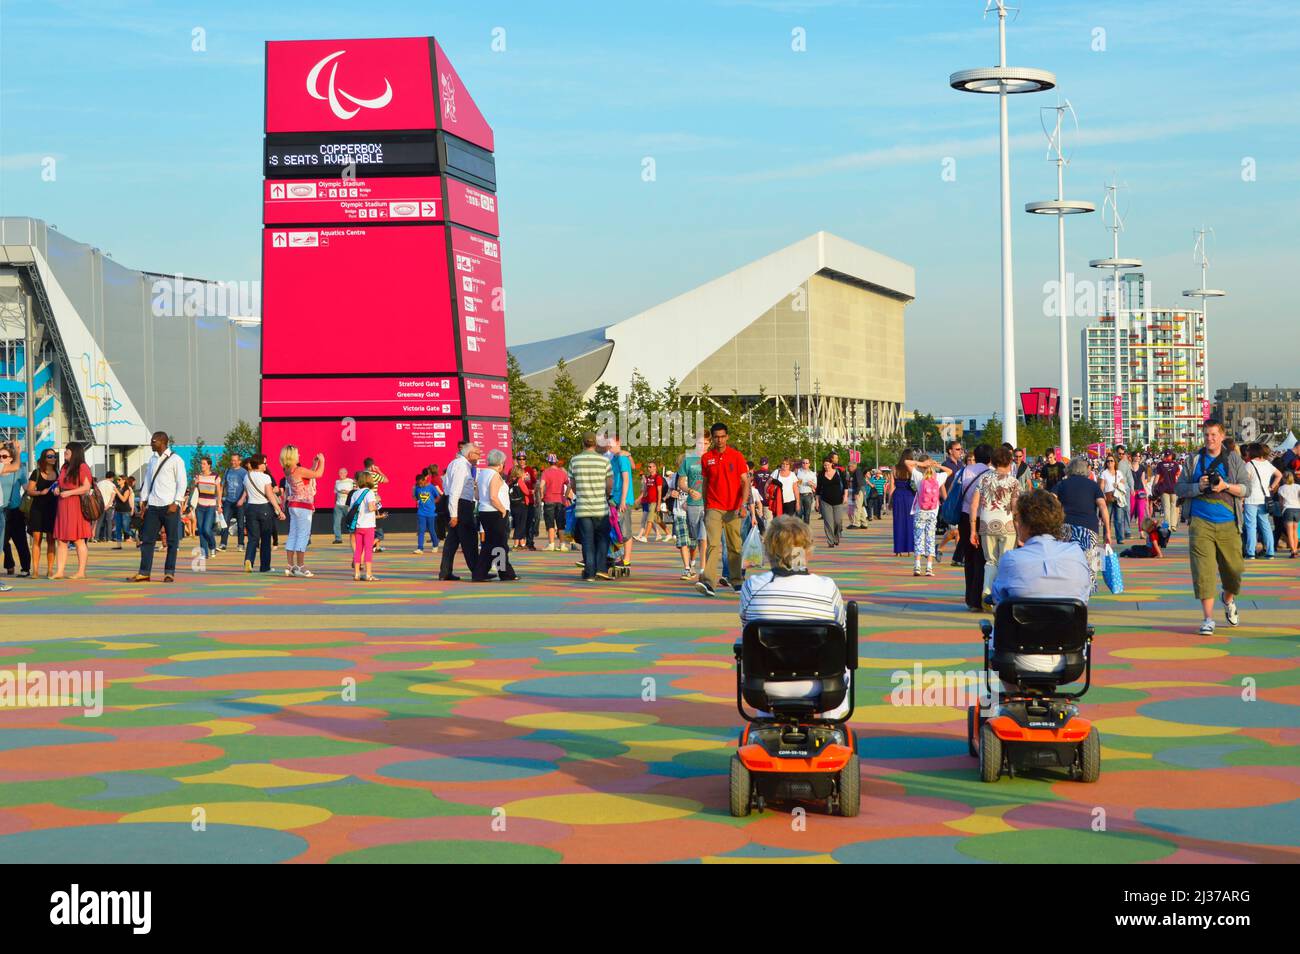 London 2012 Olympics disabled visitors & walking spectators move between sports venues in Olympic park at Paralympic Games Stratford Newham England UK Stock Photo